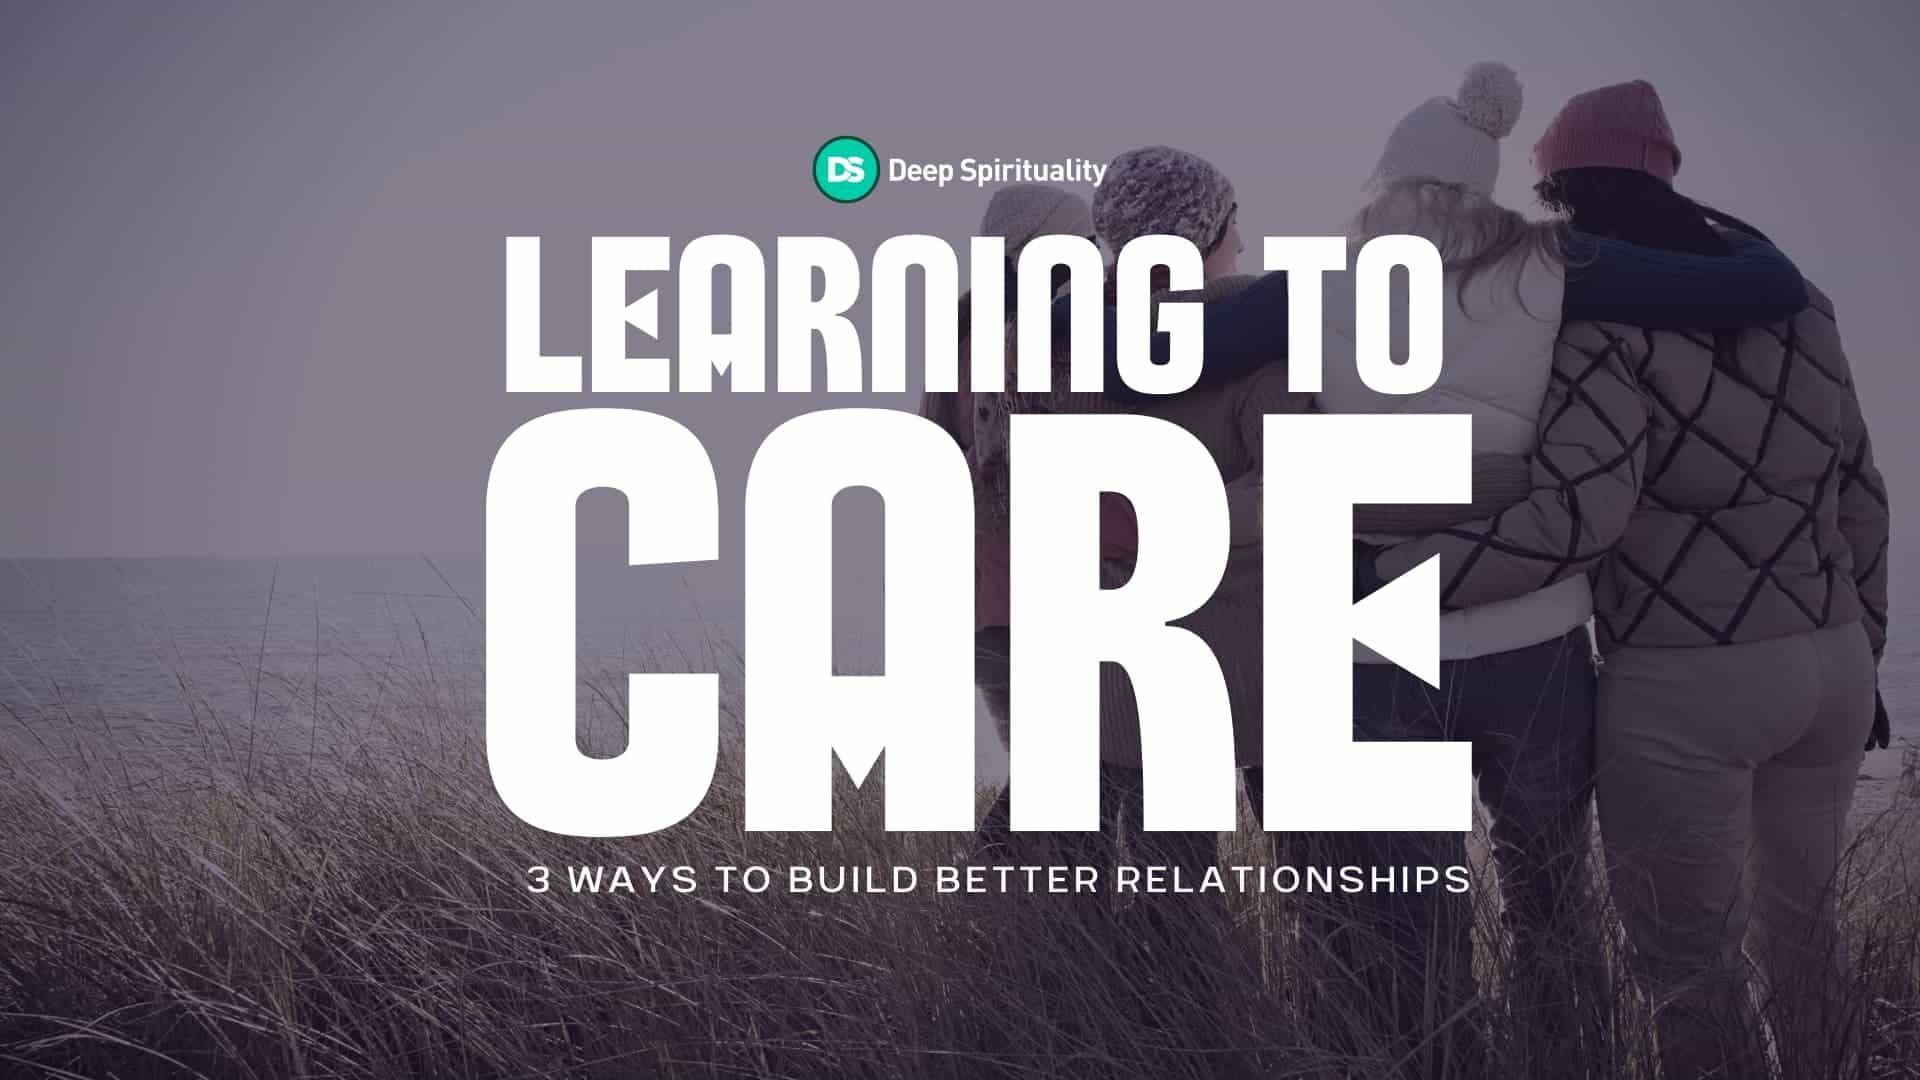 Learning to Care: 3 Ways to Build Better, More Compassionate Relationships 3